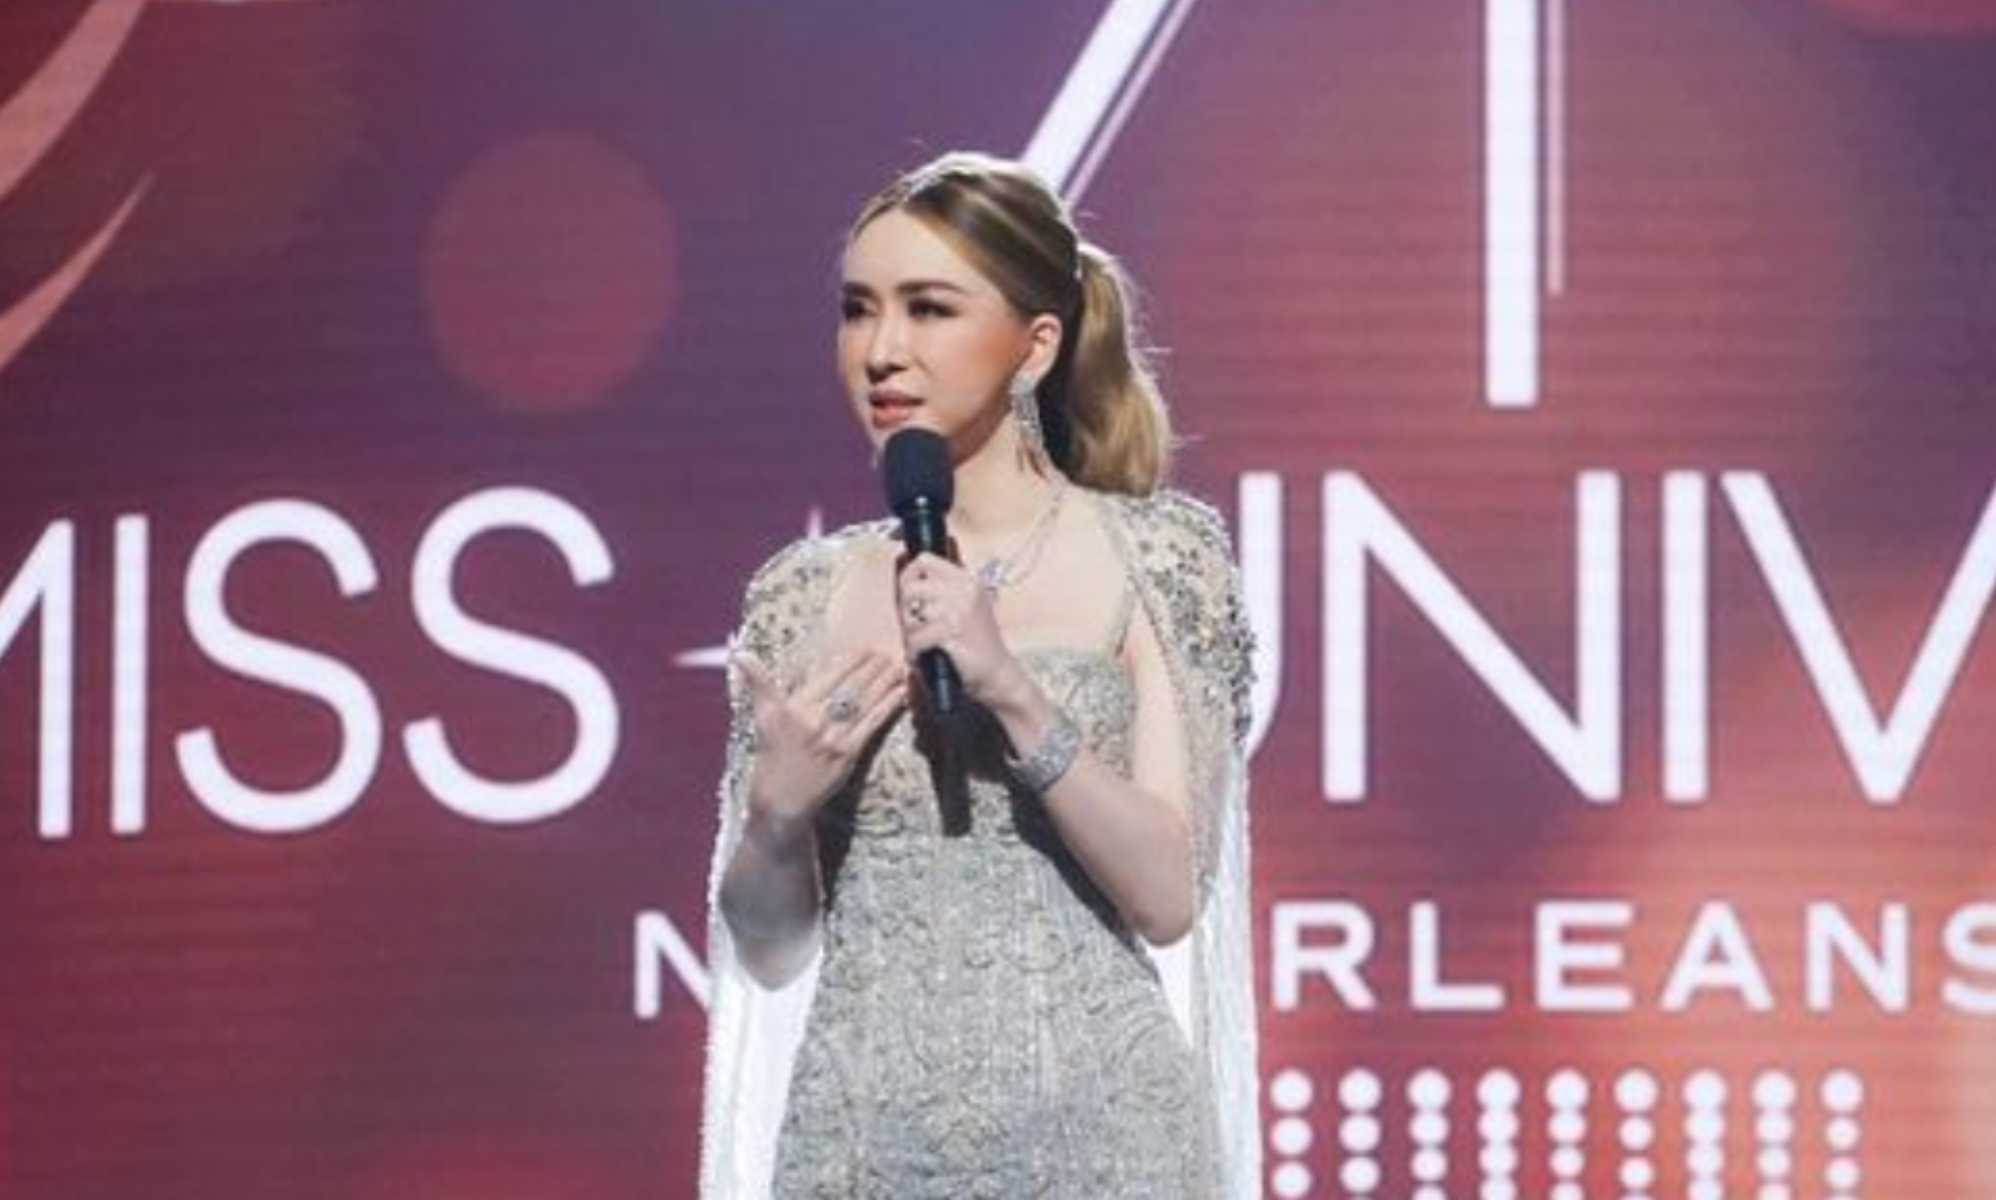 Trans Miss Universe owner gives rousing speech at pageant